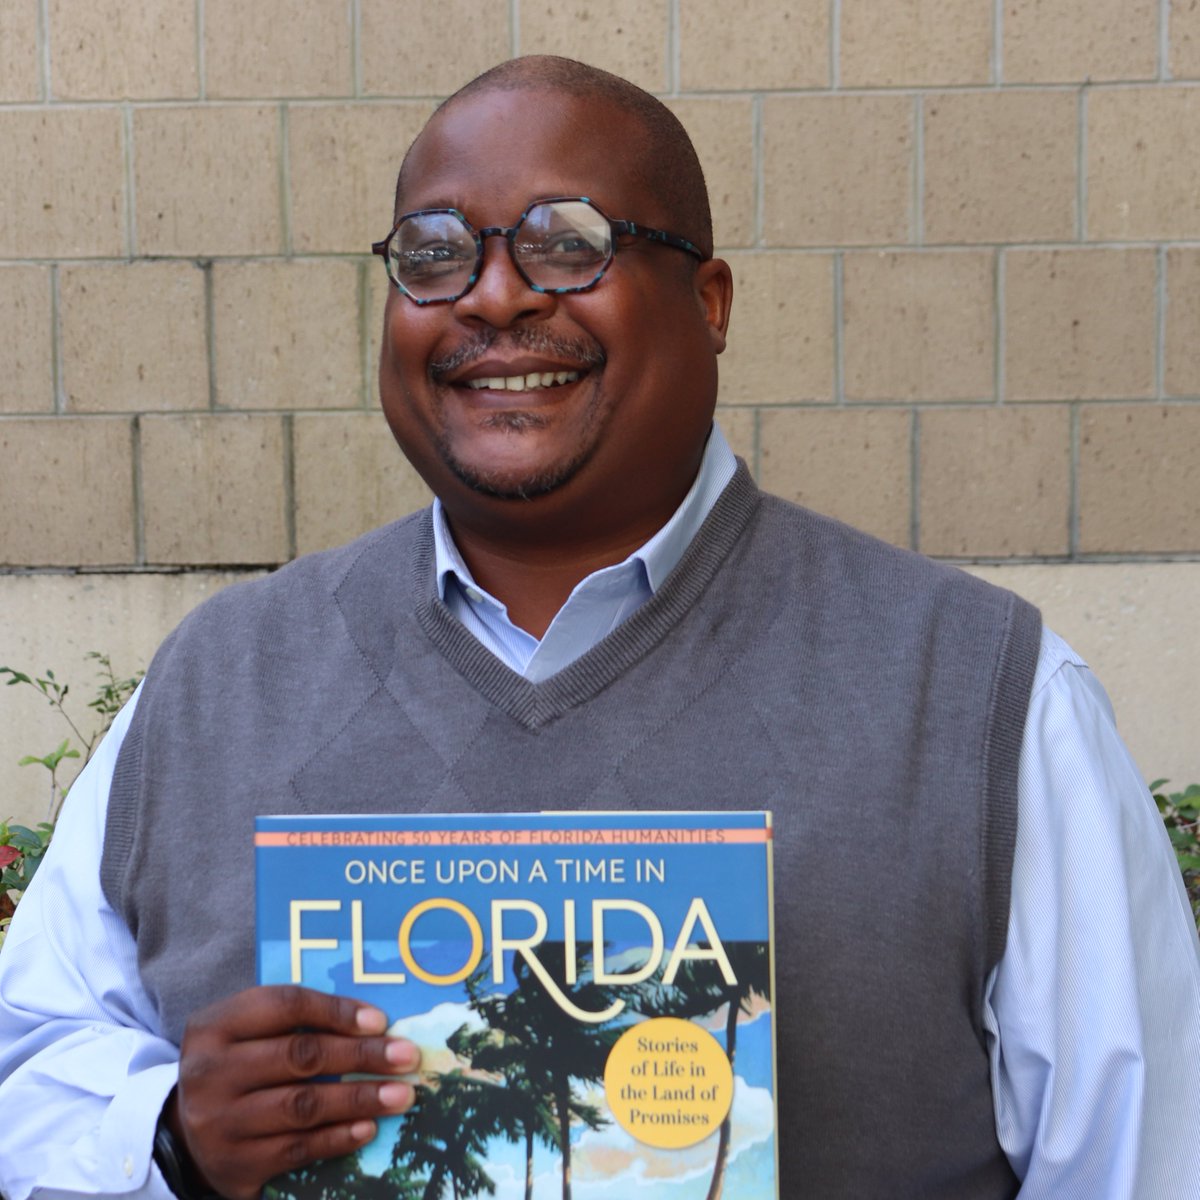 Tonight: talking with Dr. Nashid Madyun, executive director of @FlHumanities and Jacki Levine, editor of 'Once Upon a Time in Florida', a collection of writing about our state curated from FORUM magazine & celebrating 50 years of Florida Humanities. 6:30pm on @wusf 89.7 FM